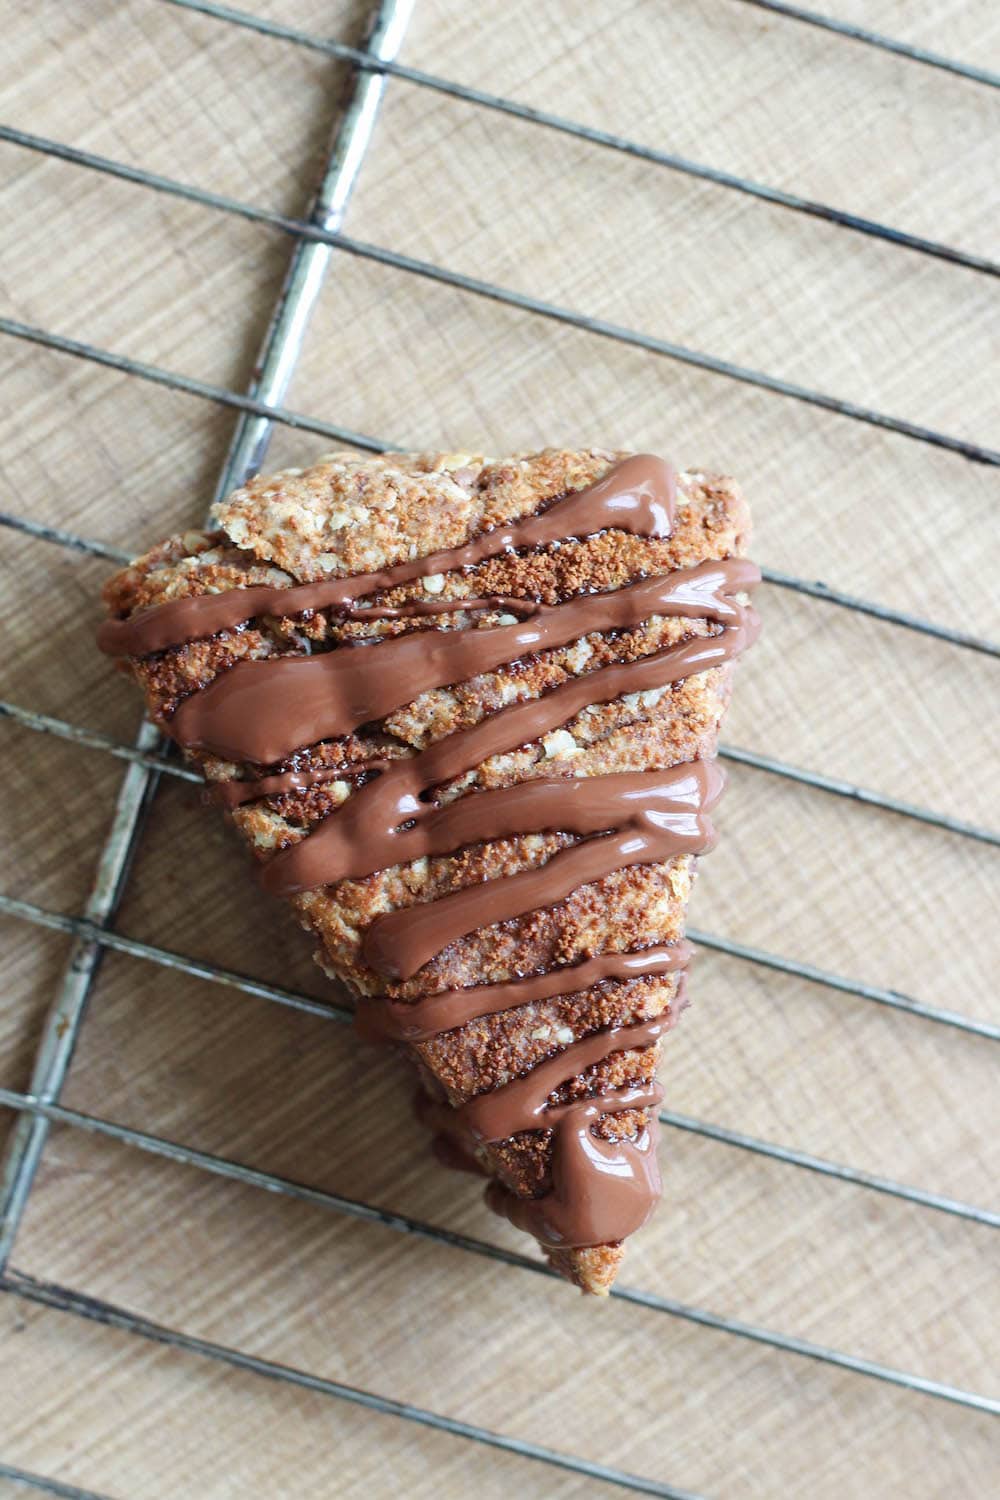 THE BEST Vegan Chocolate Peanut Butter Oatmeal Scones with chocolate drizzle!